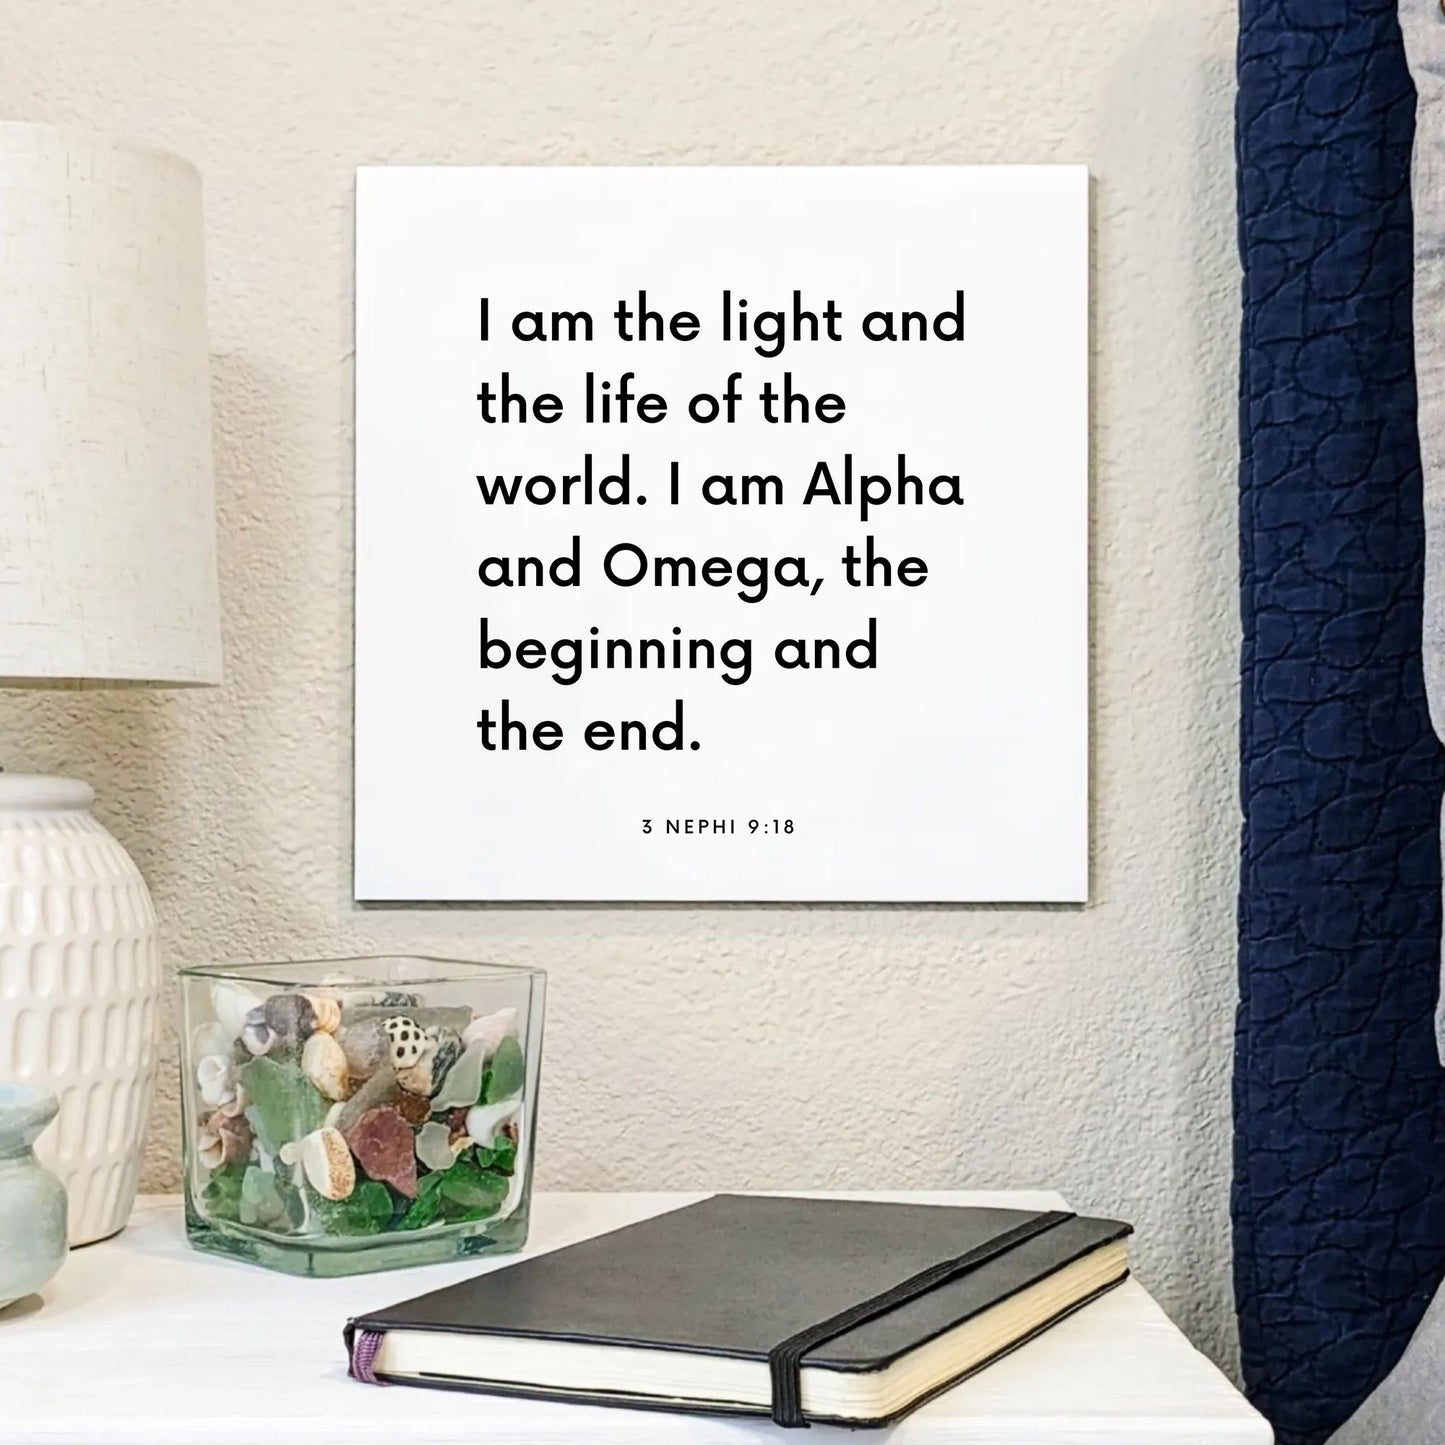 Bedside mouting of the scripture tile for 3 Nephi 9:18  - "I am Alpha and Omega, the beginning and the end"